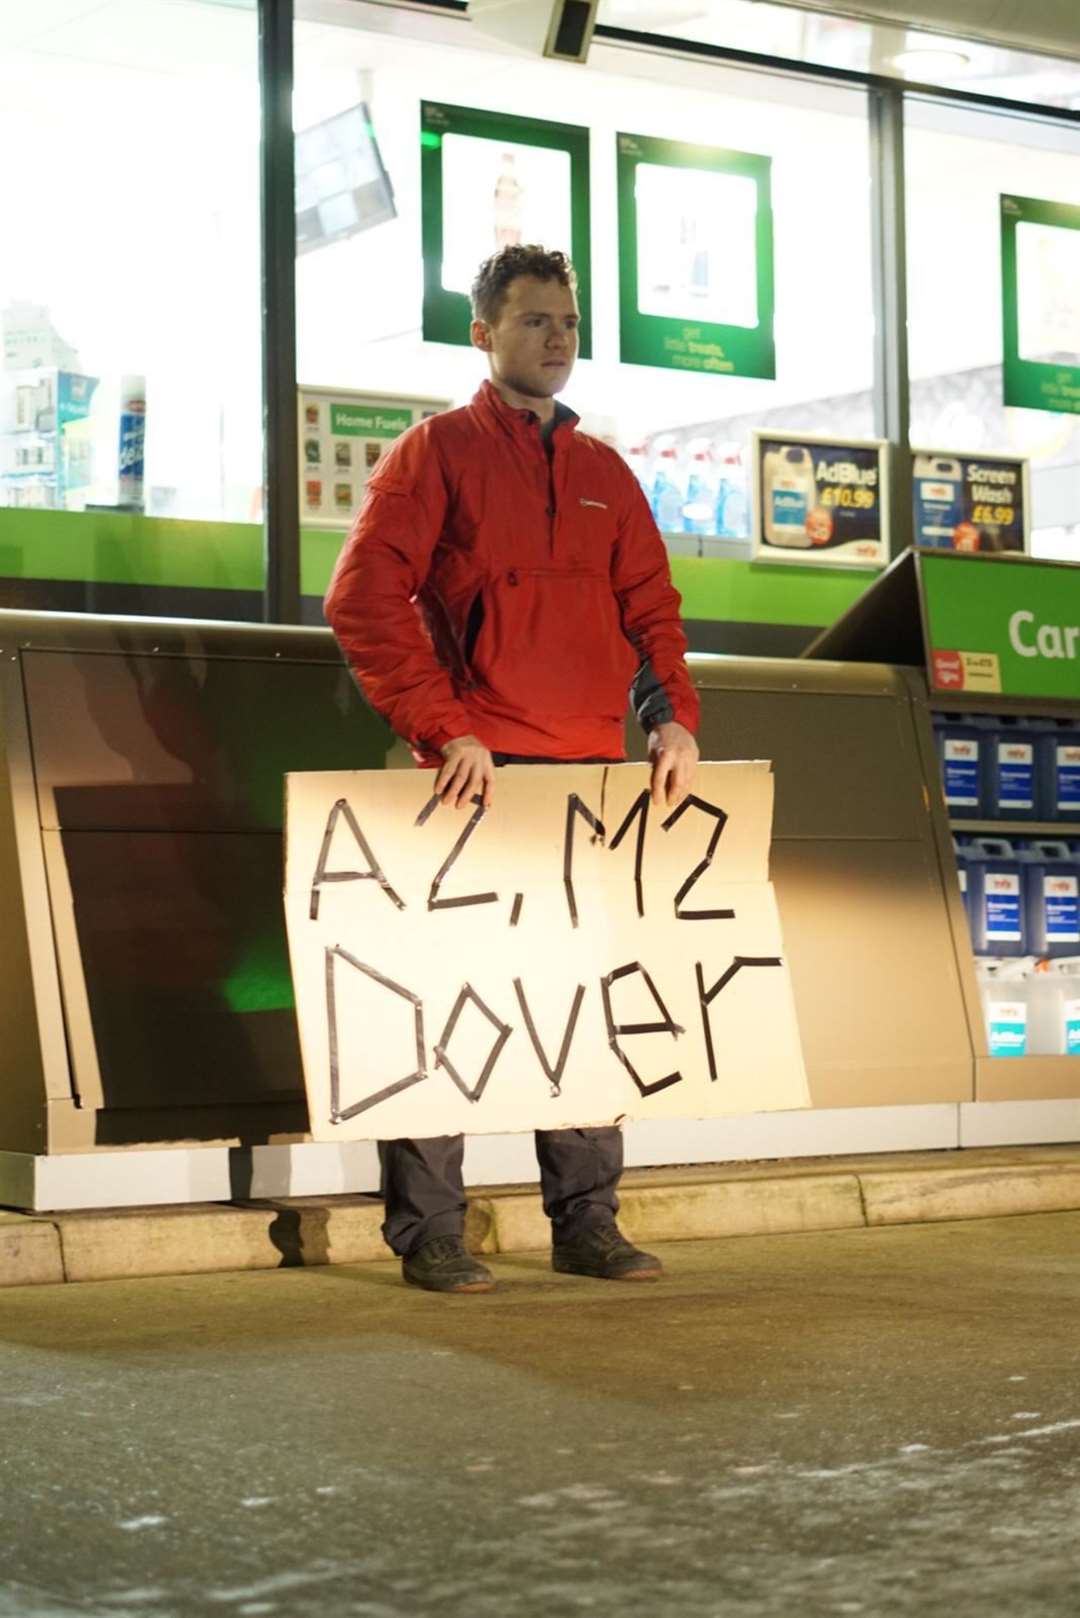 Owen Hope with a sign asking for a lift to Dover.